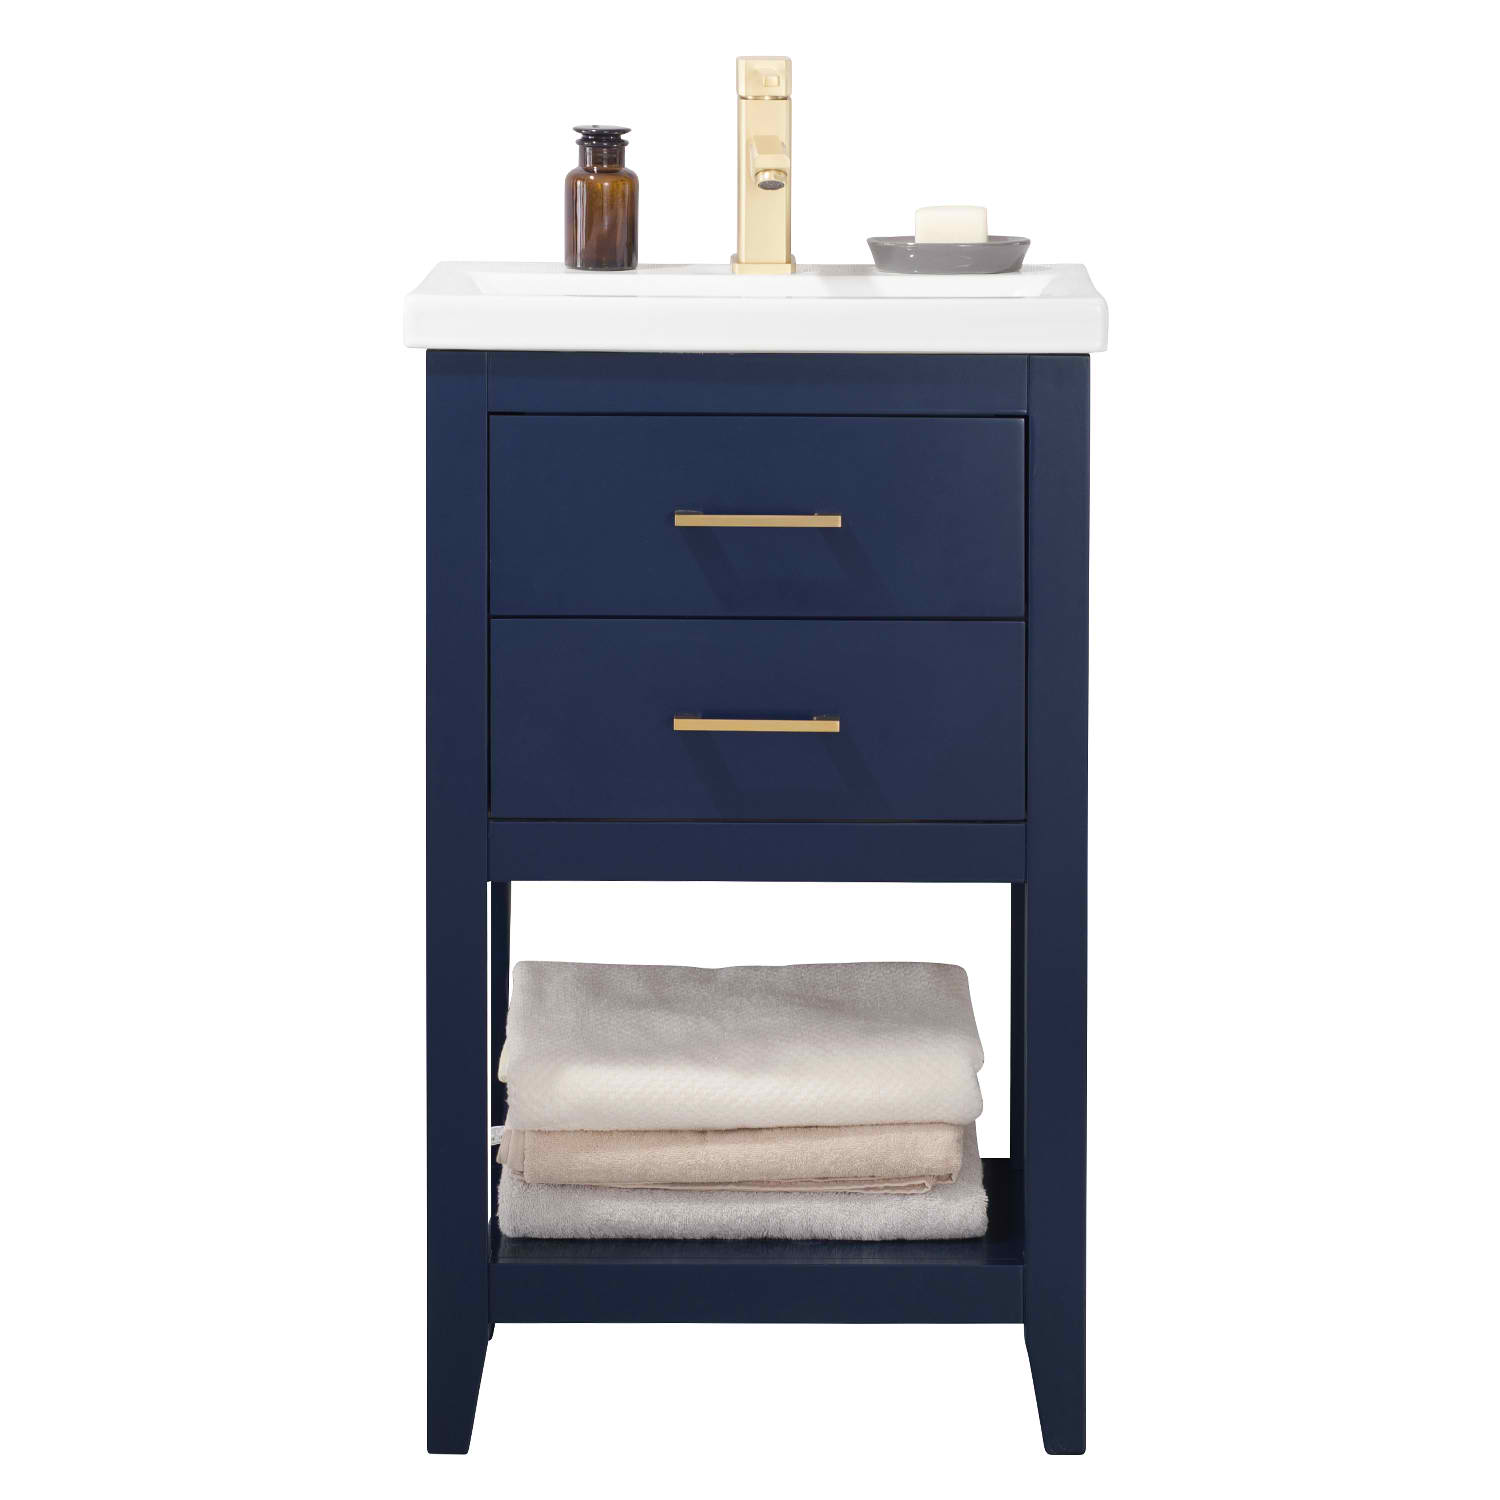 20" Modern Single Sink Vanity with Porcelain Integrated Counterop and Sink in Blue Finish